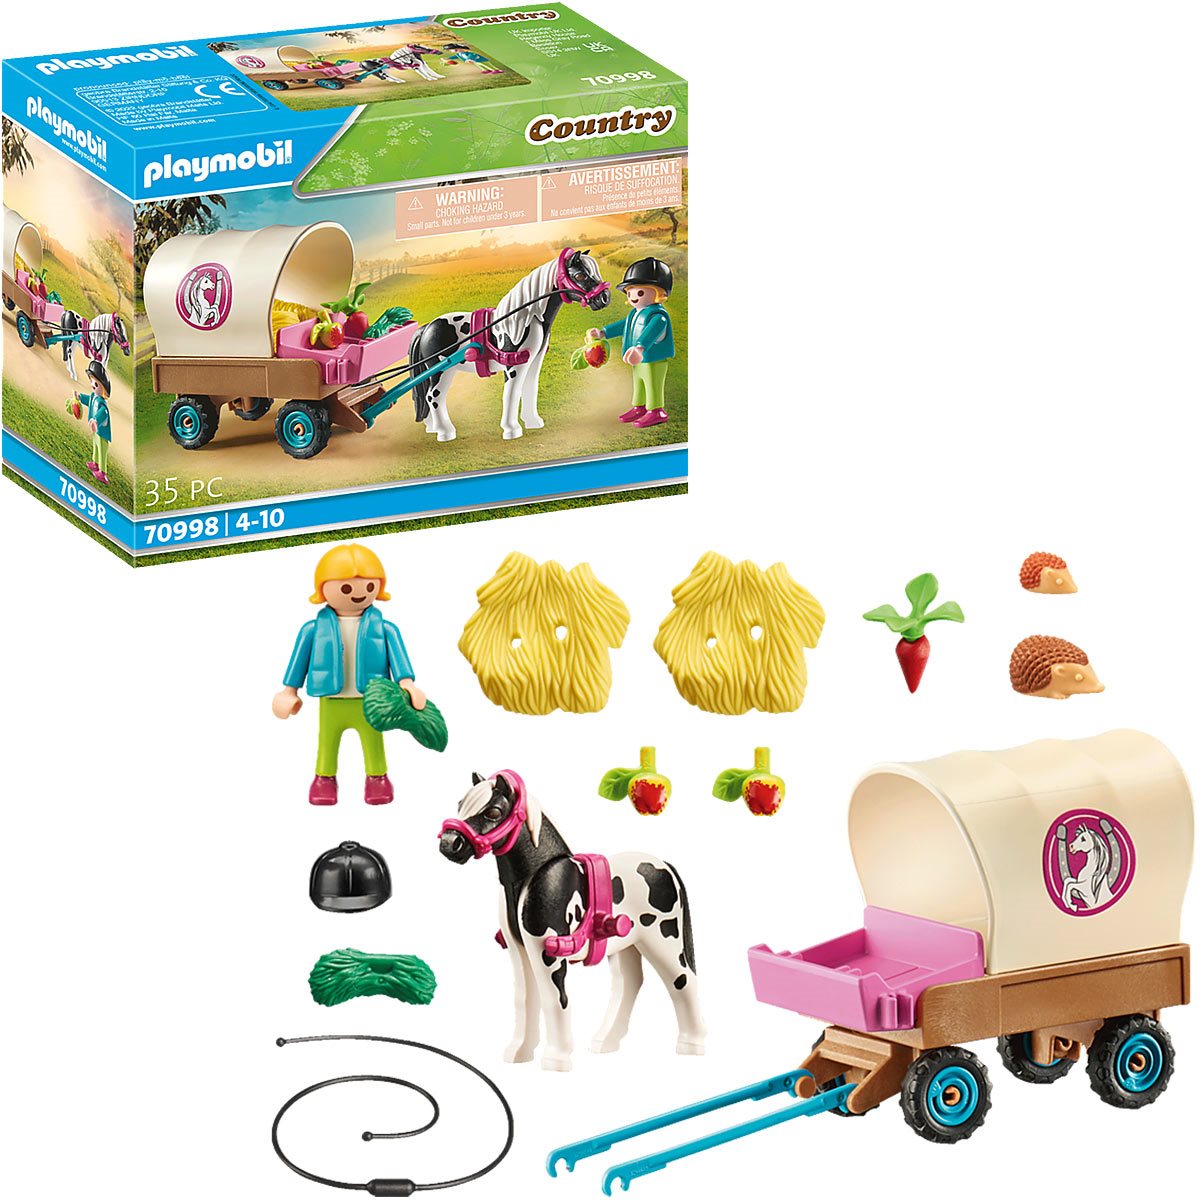 Playmobil Country Car with Pony Trailer Playset 44 Piece for Ages 4-10